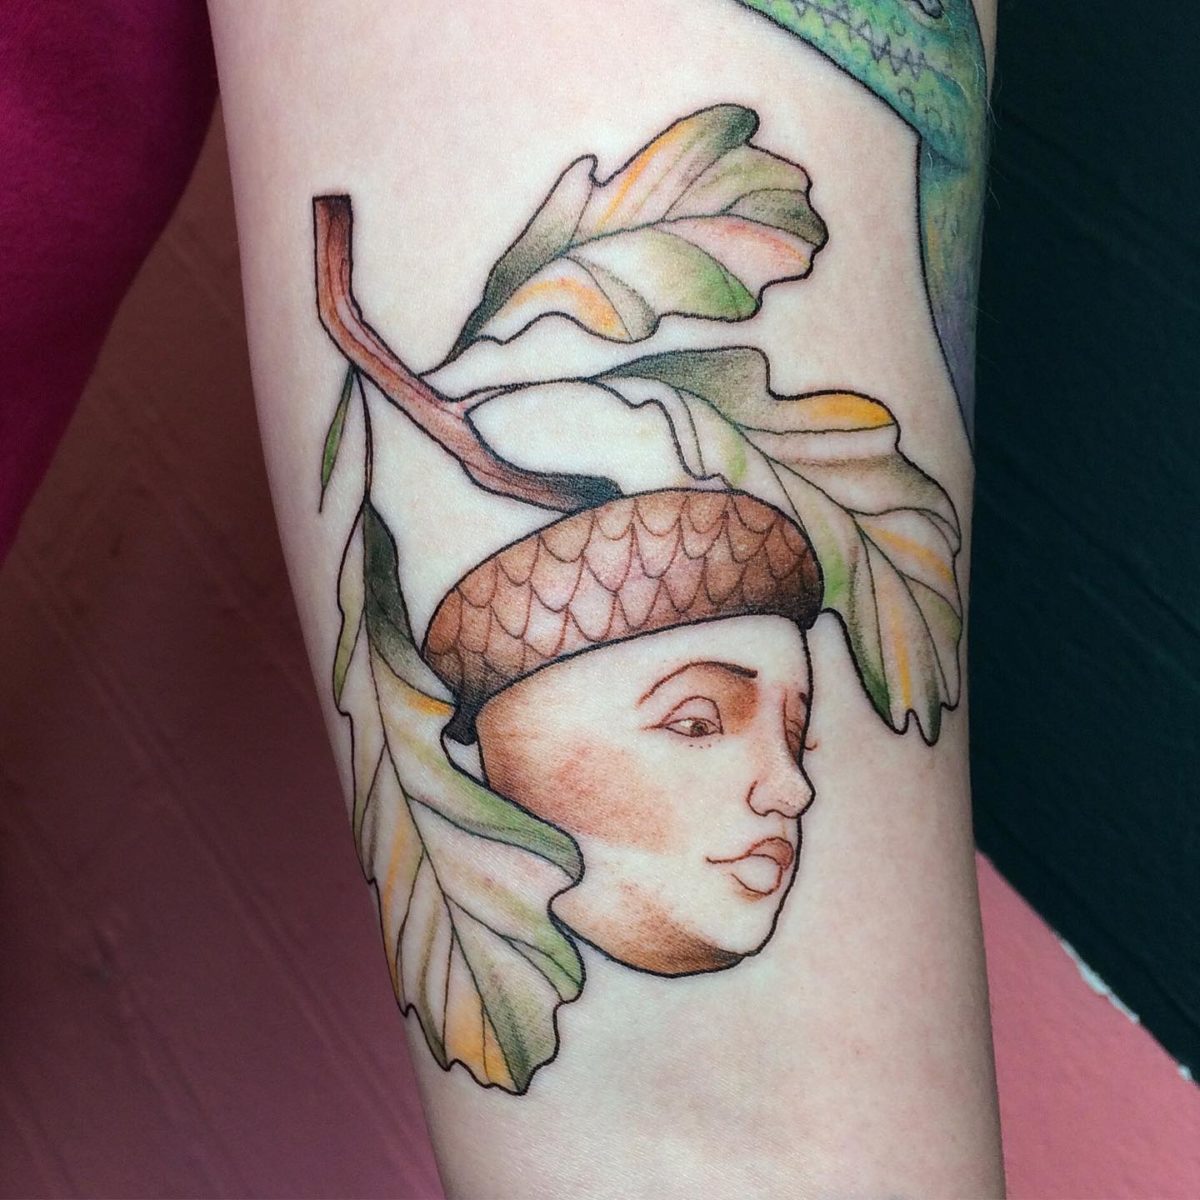 27 Tattoos for Those Who Love to Feast on Thanksgiving | Check out these amazing food tattoos that celebrate Thanksgiving.